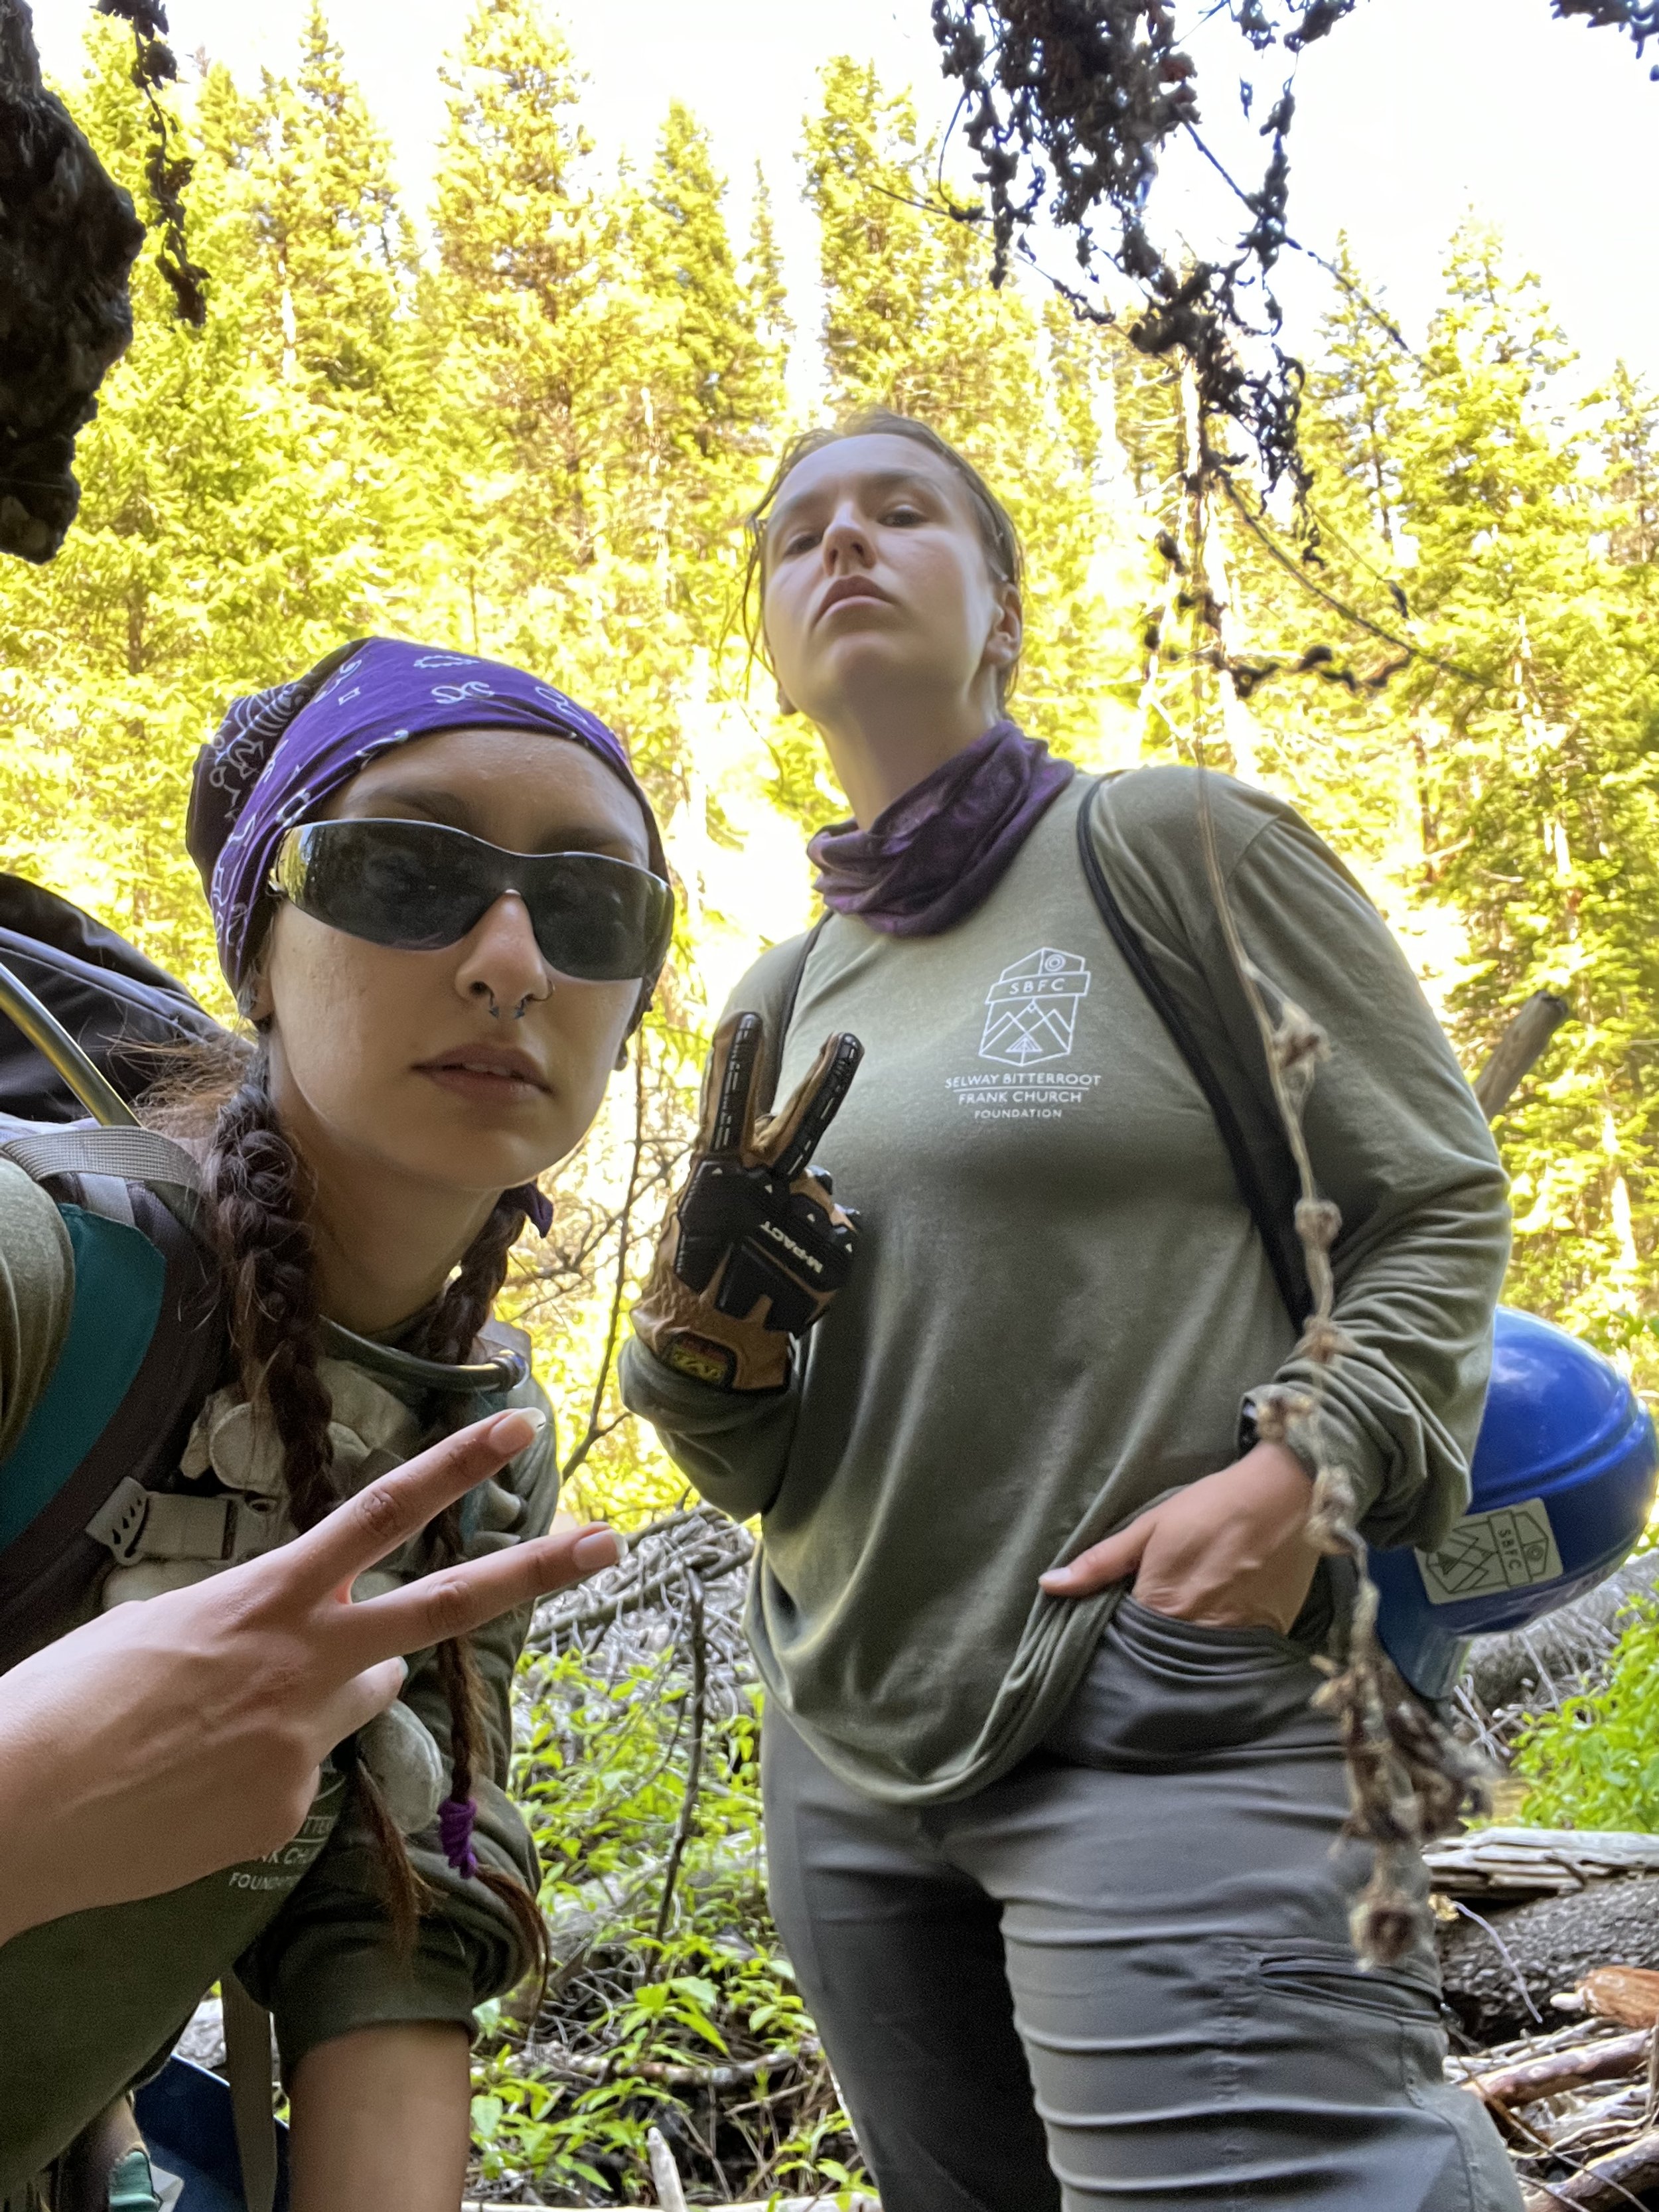    Hannah Richter and Reyna Rodriguez being cool, on the #4 trail of the upper Selway, Bitterroot NF, Frank Church Wilderness, photo by Reyna Rodriguez   